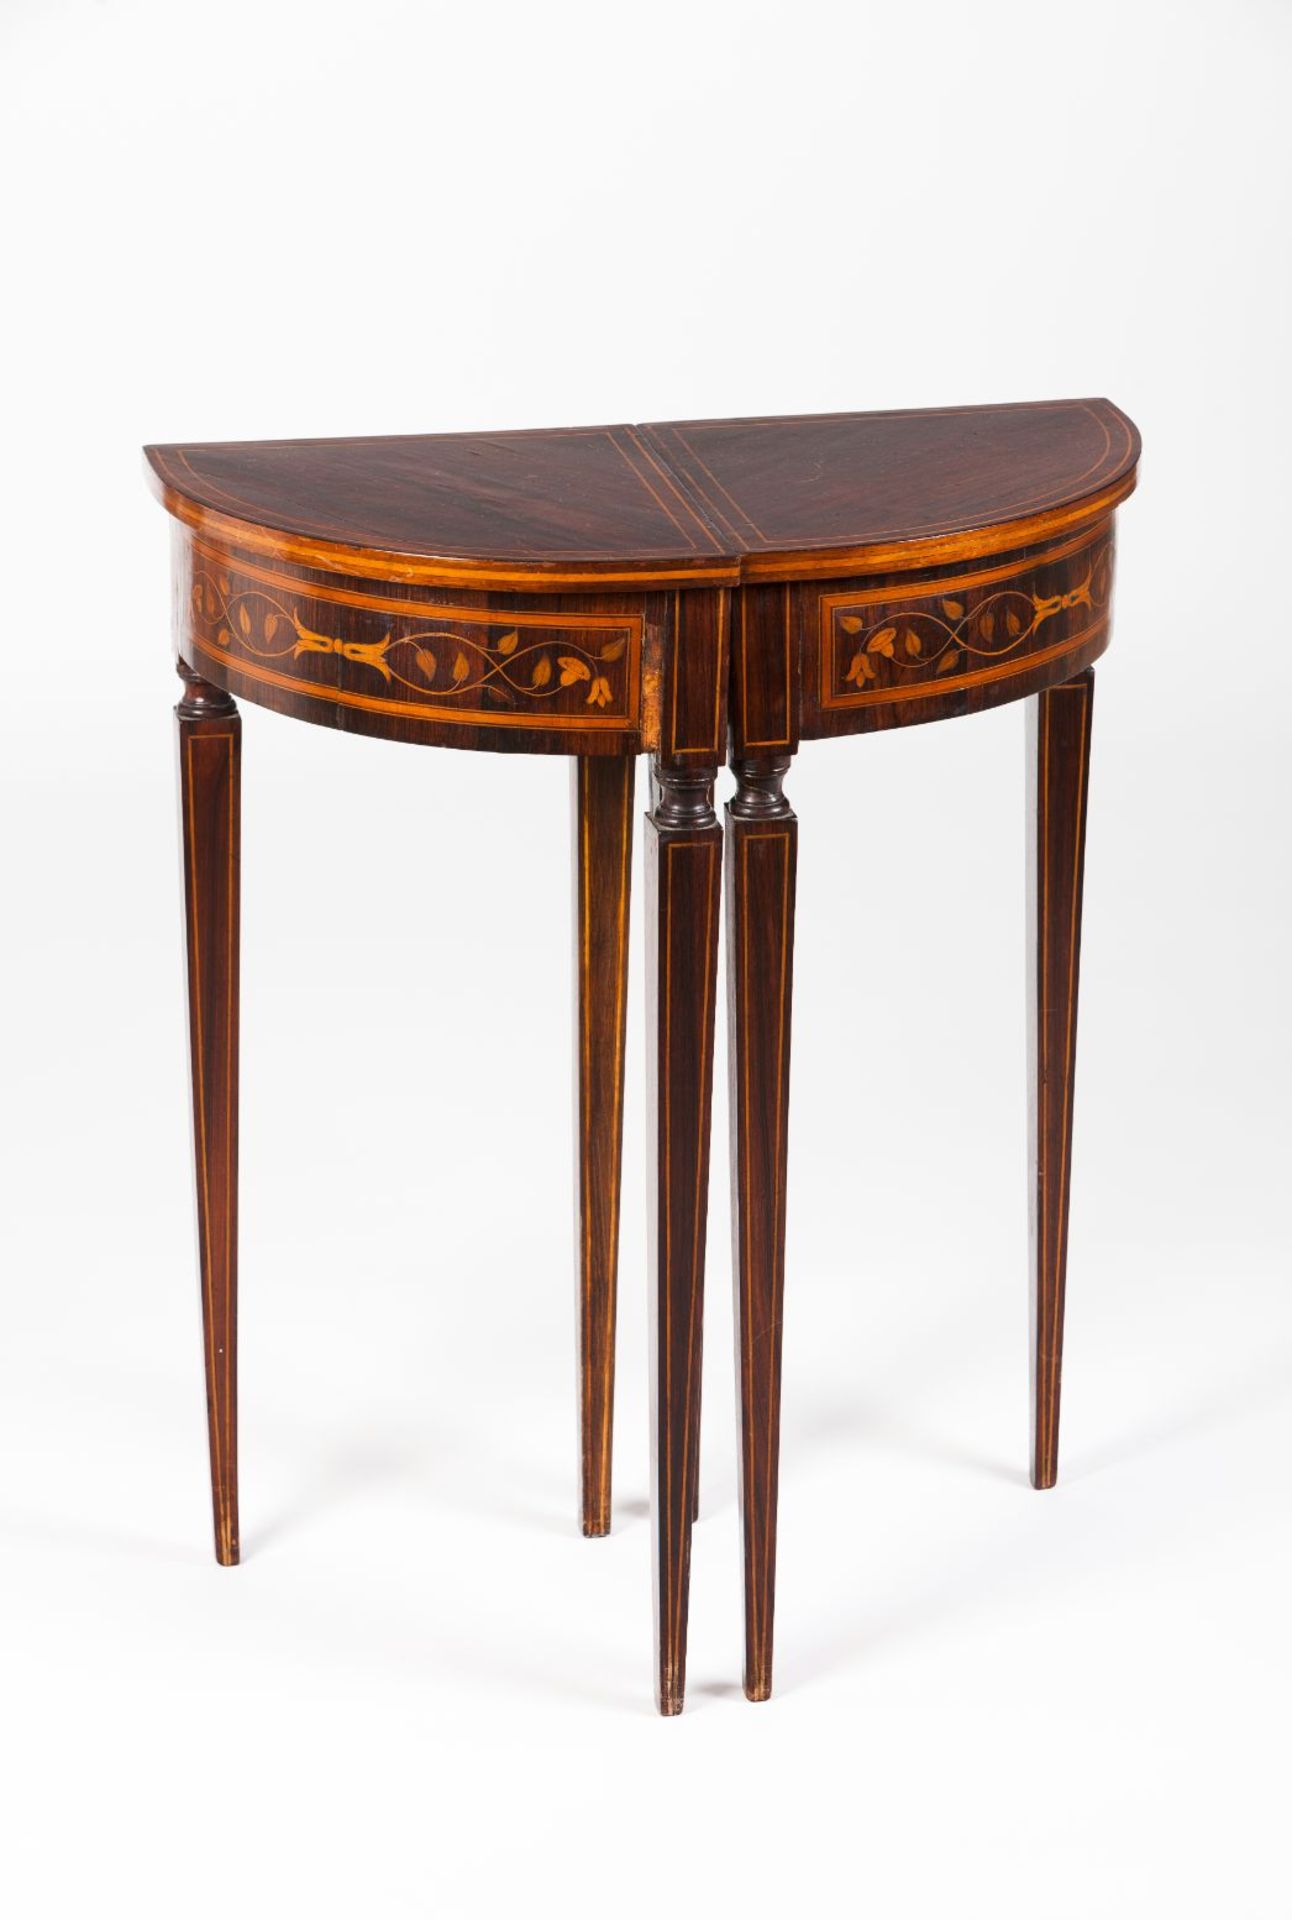 A pair of D.José style corner tablesSolid and veneered rosewood and other timbers Inlaid foliage